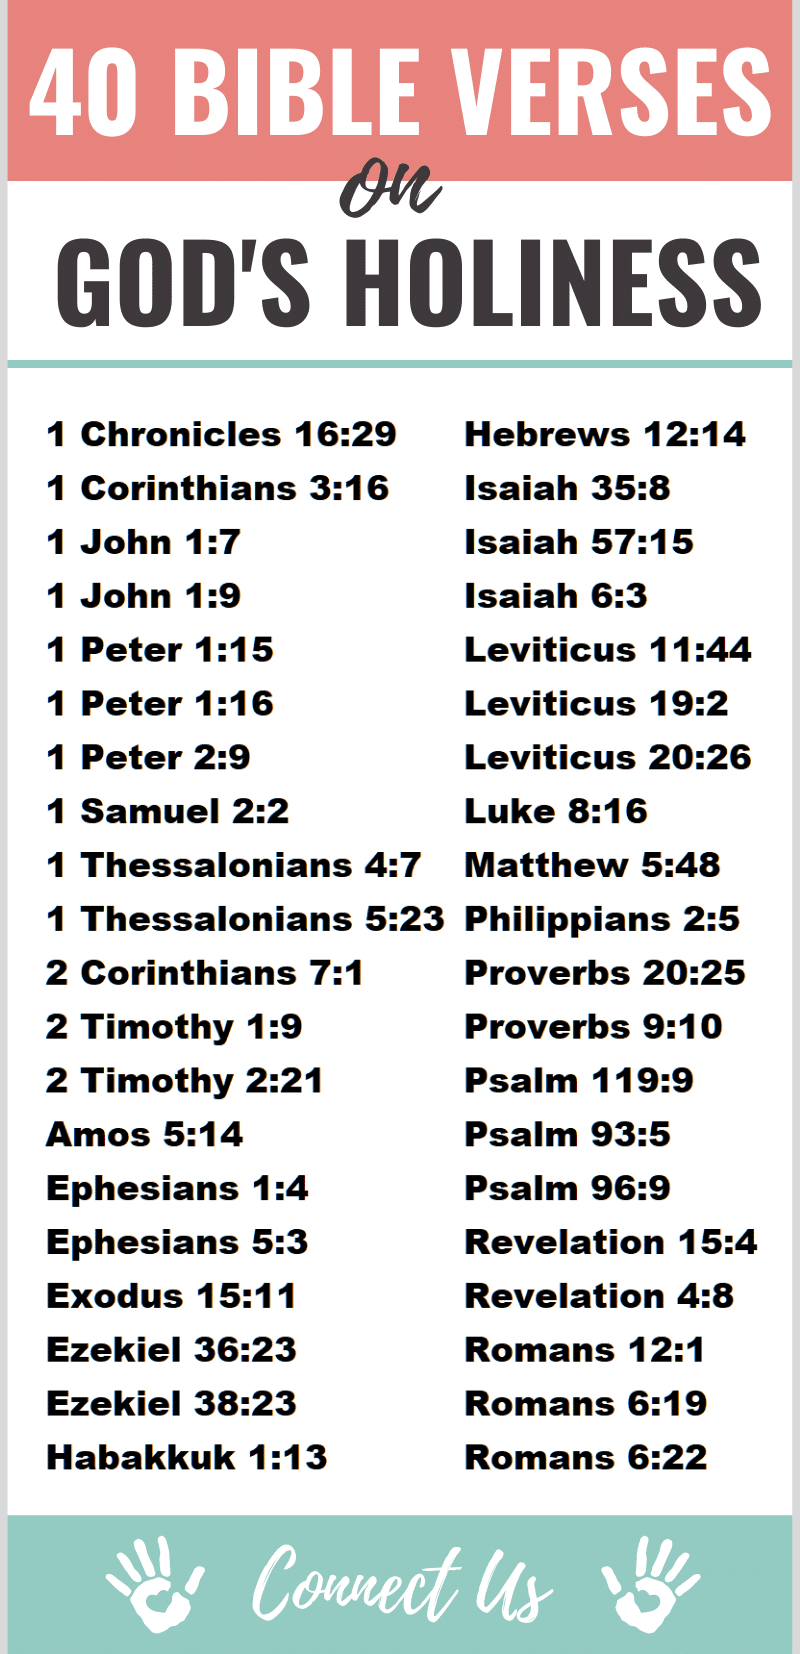 Bible Verses on God's Holiness